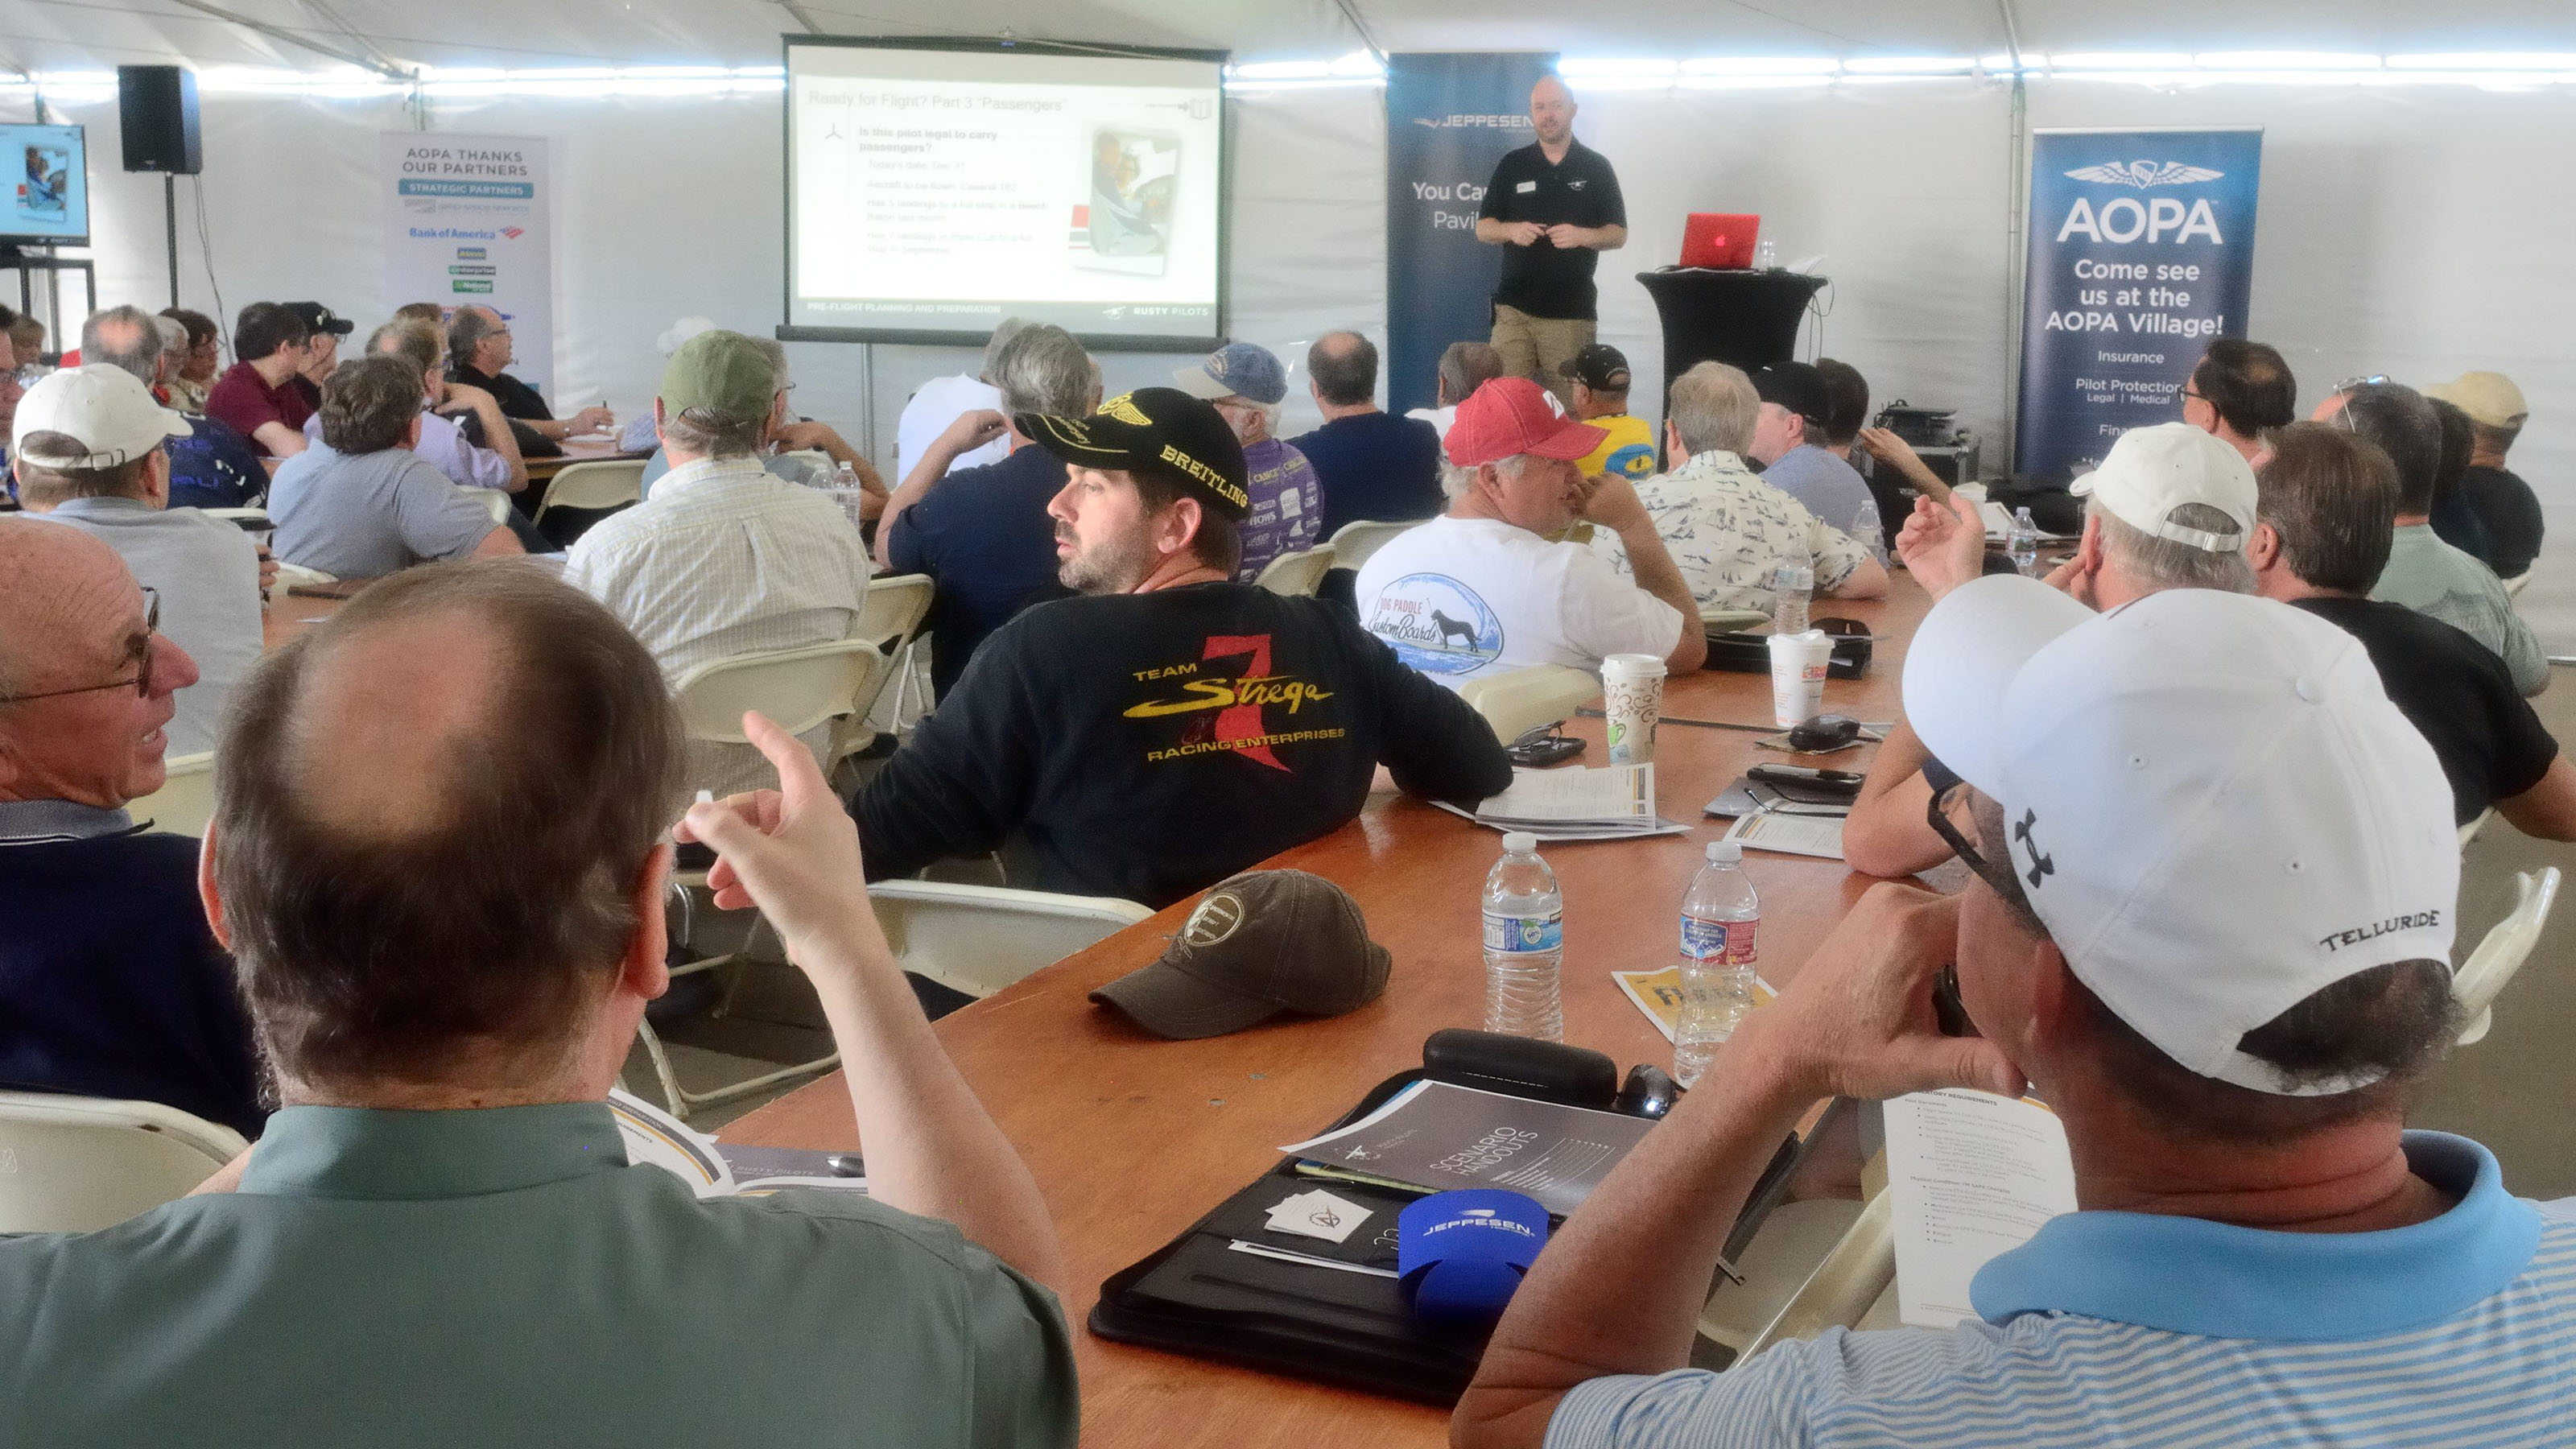 Chris Moser, with AOPA's You Can Fly initiative, leads a Rusty Pilots seminar at the AOPA Fly-In at Camarillo, California. Photo by Mike Collins.